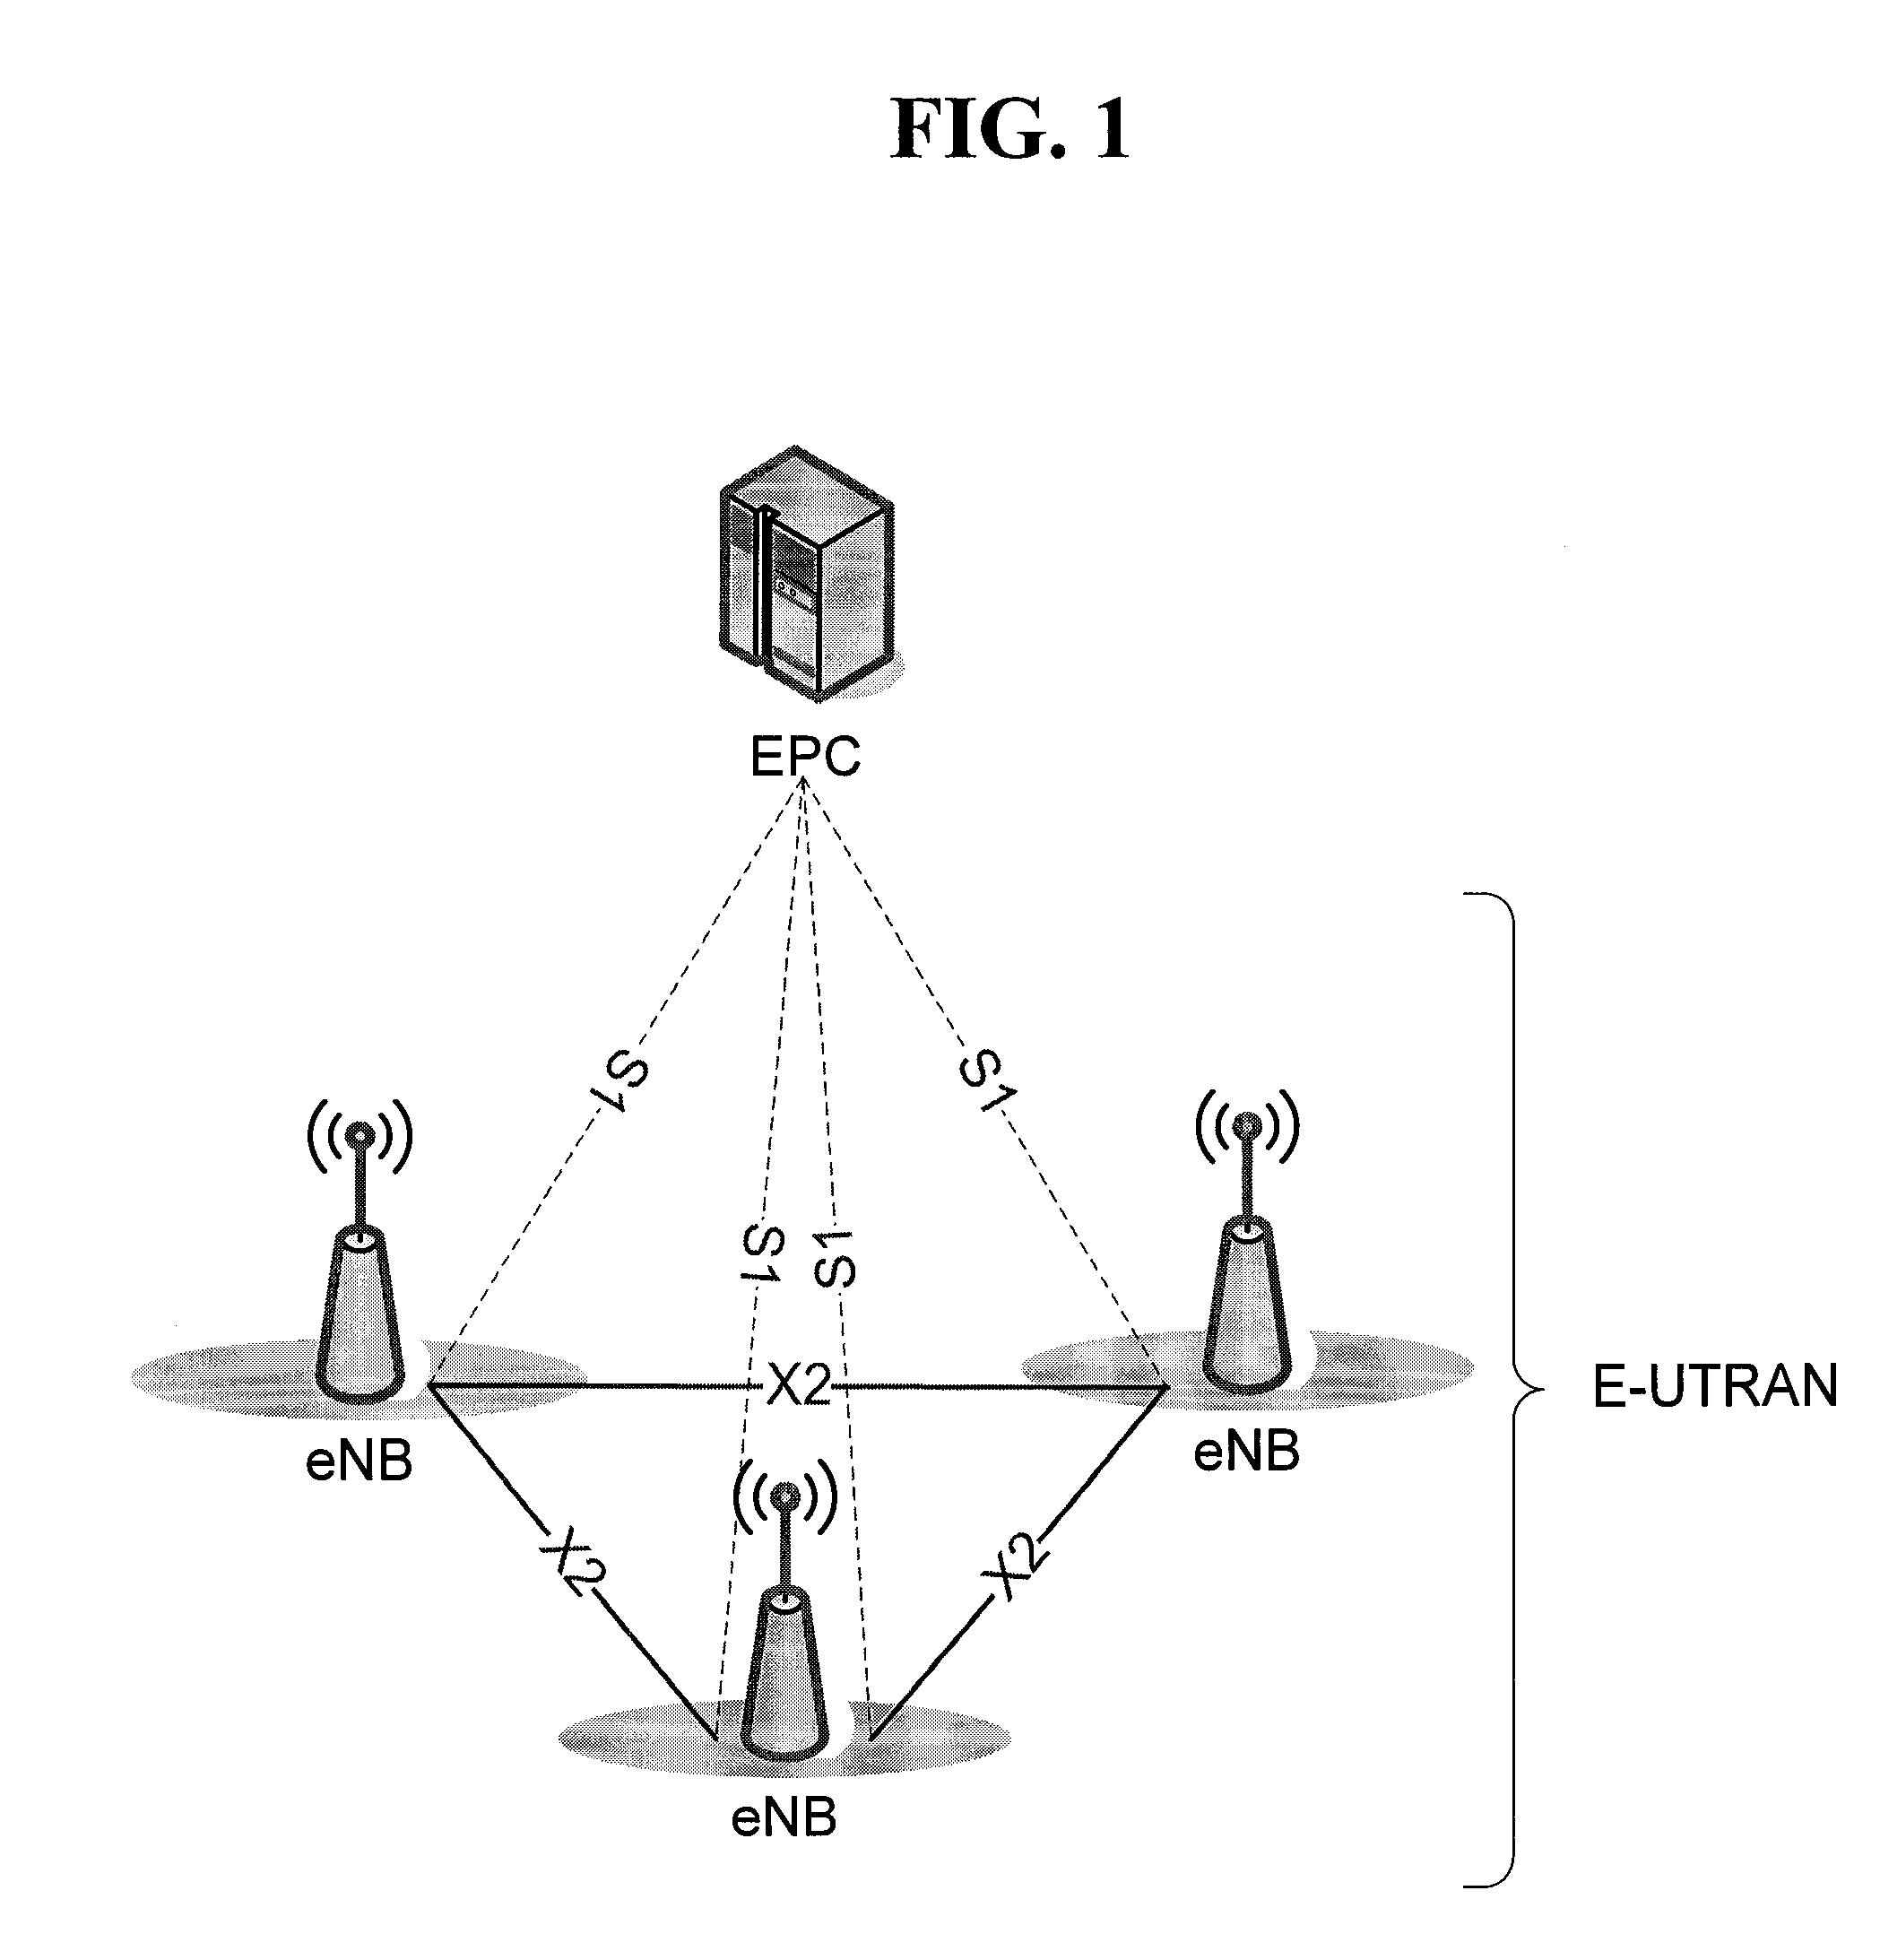 Method for reselecting a cell and detecting whether a terminal is stationay in mobile telecommunications system